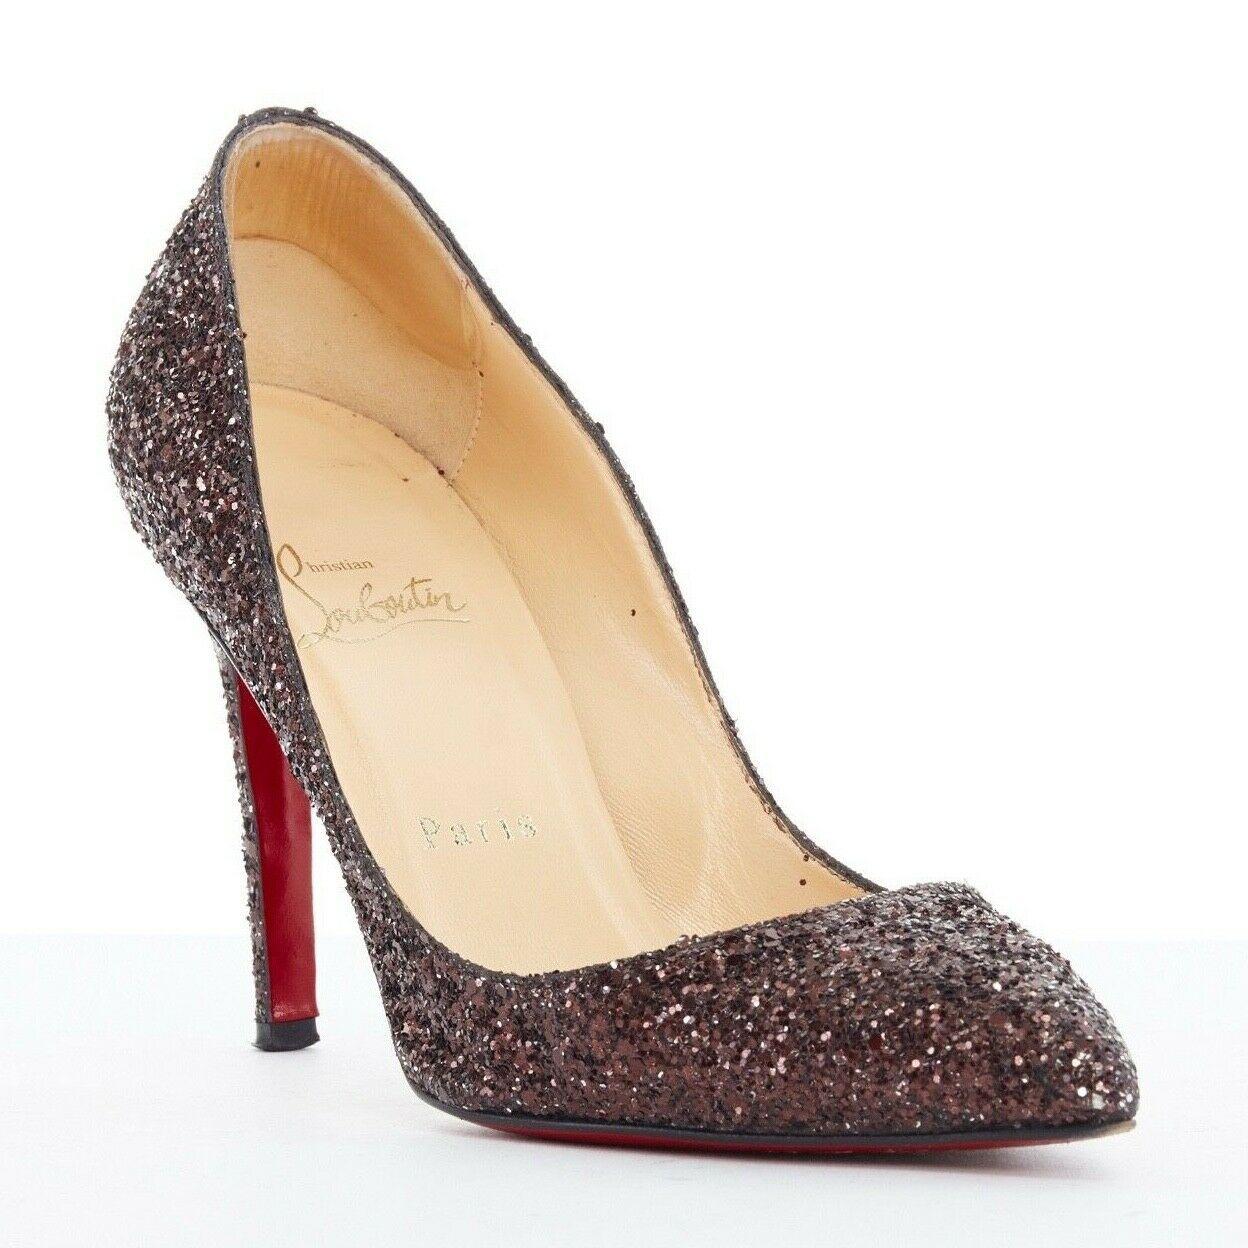 CHRISTIAN LOUBOUTIN brown glitter point toe pigalle pump heels EU37
CHRISTIAN LOUBOUTIN
Course glitter covered leather upper. Point toe. 
Covered stiletto heel. Tan leather lining and sole. 
Signature red leather outsole. 
Made in